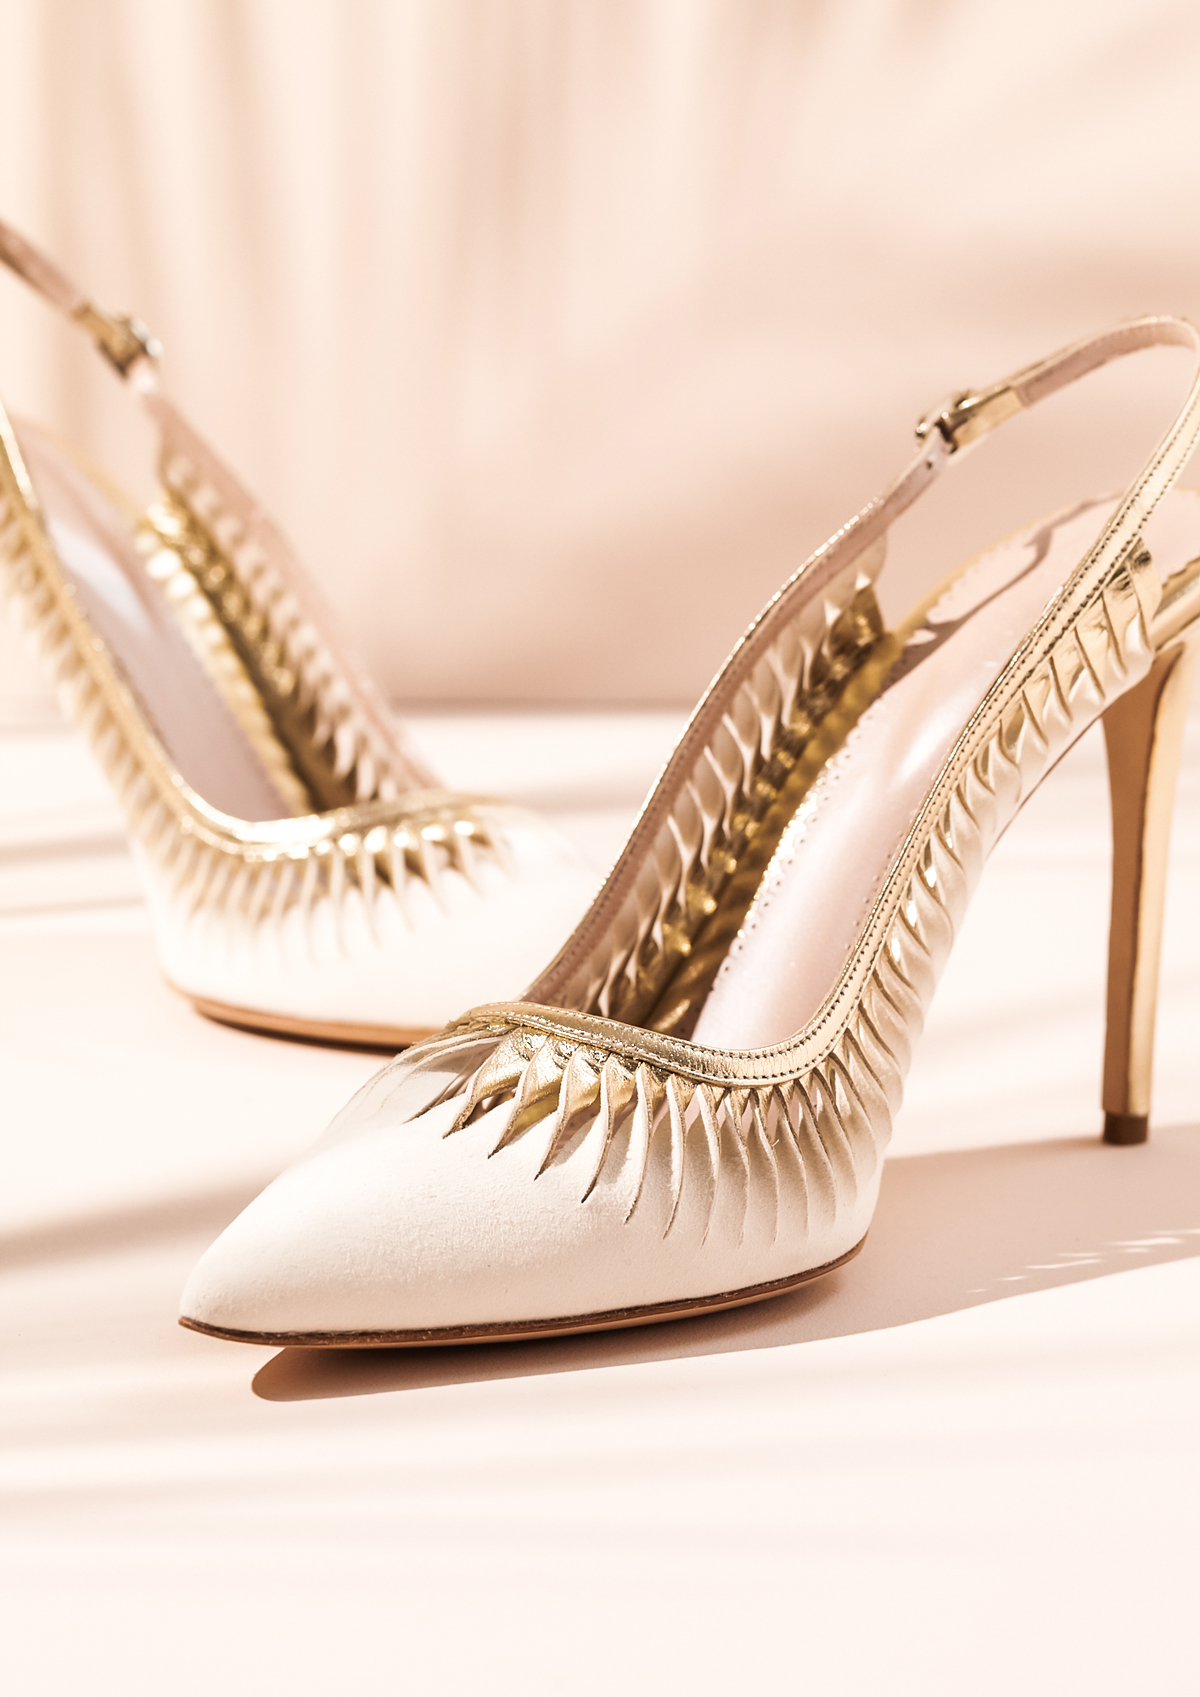 Pointed wedding shoes, Emmy London.